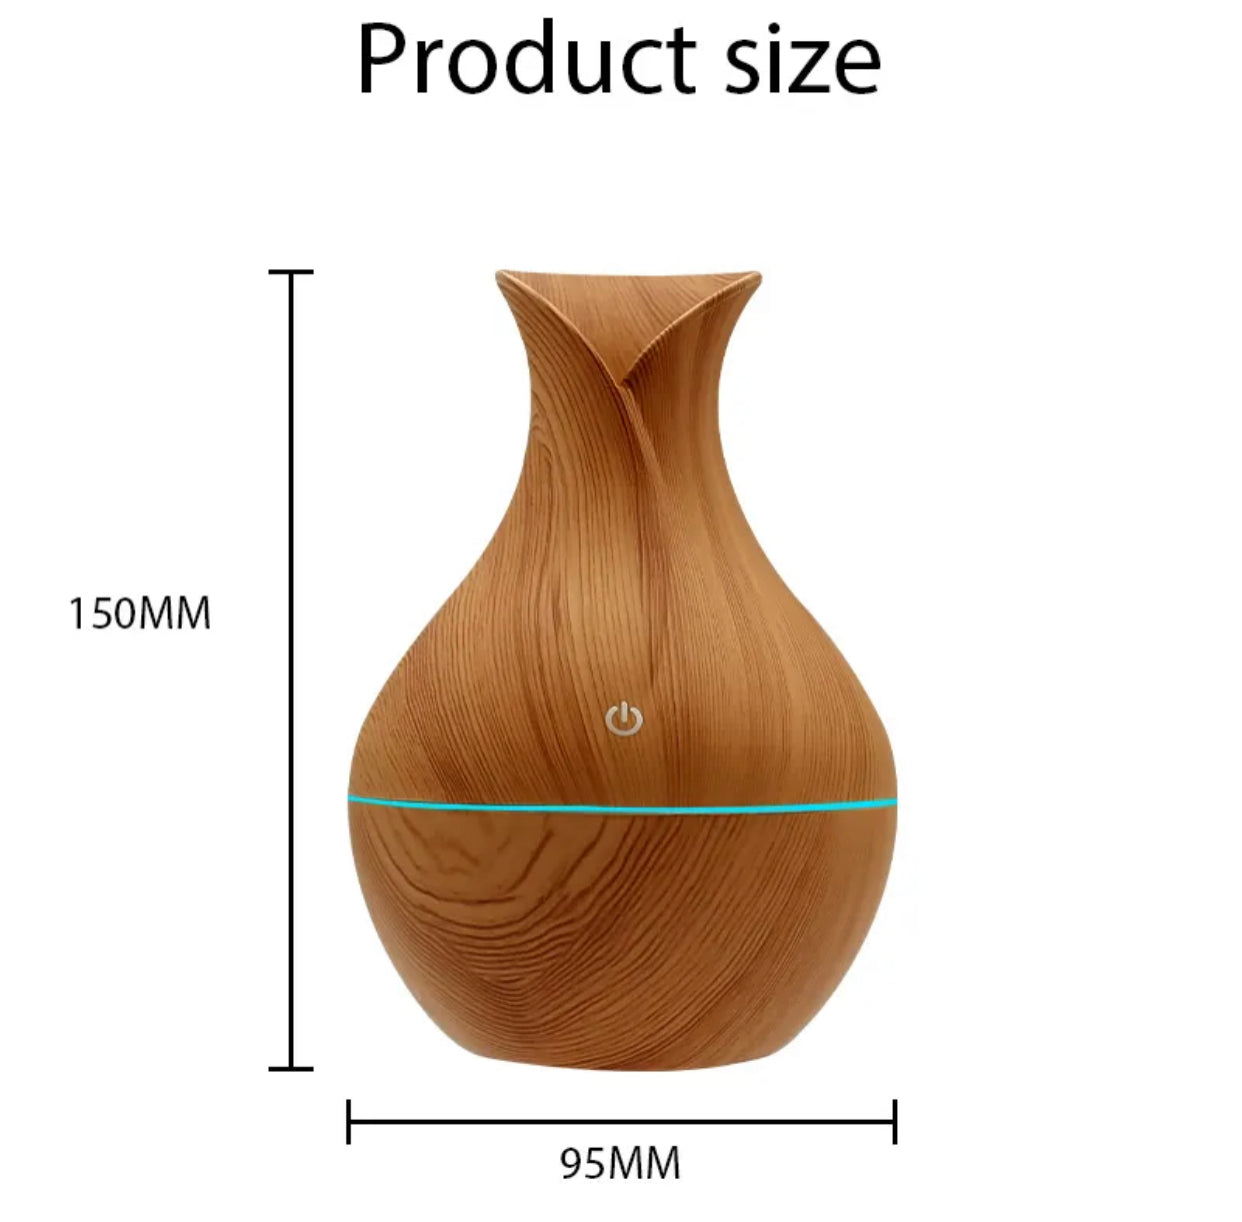 Vase in wood grain - diffuser - humidifier: naturalness meets modern technology